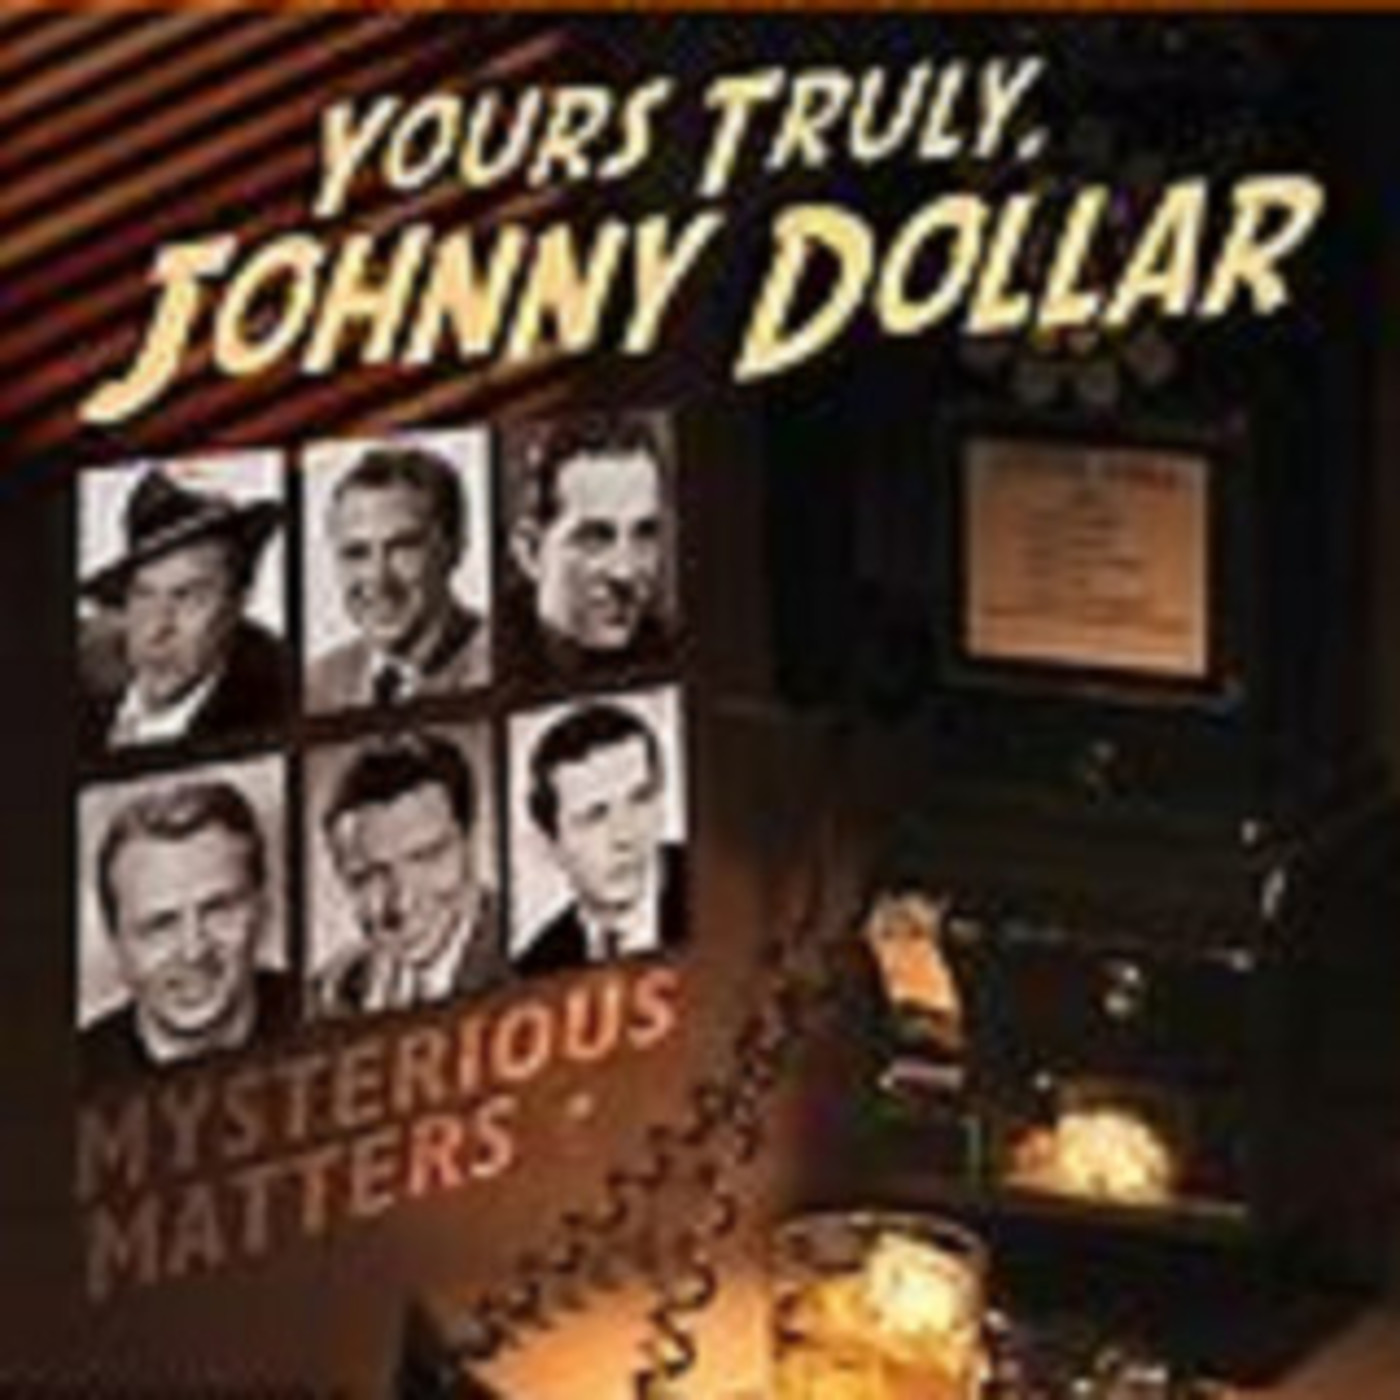 Yours Truly, Johnny Dollar - 052762, episode 793 - The Zipp Matter